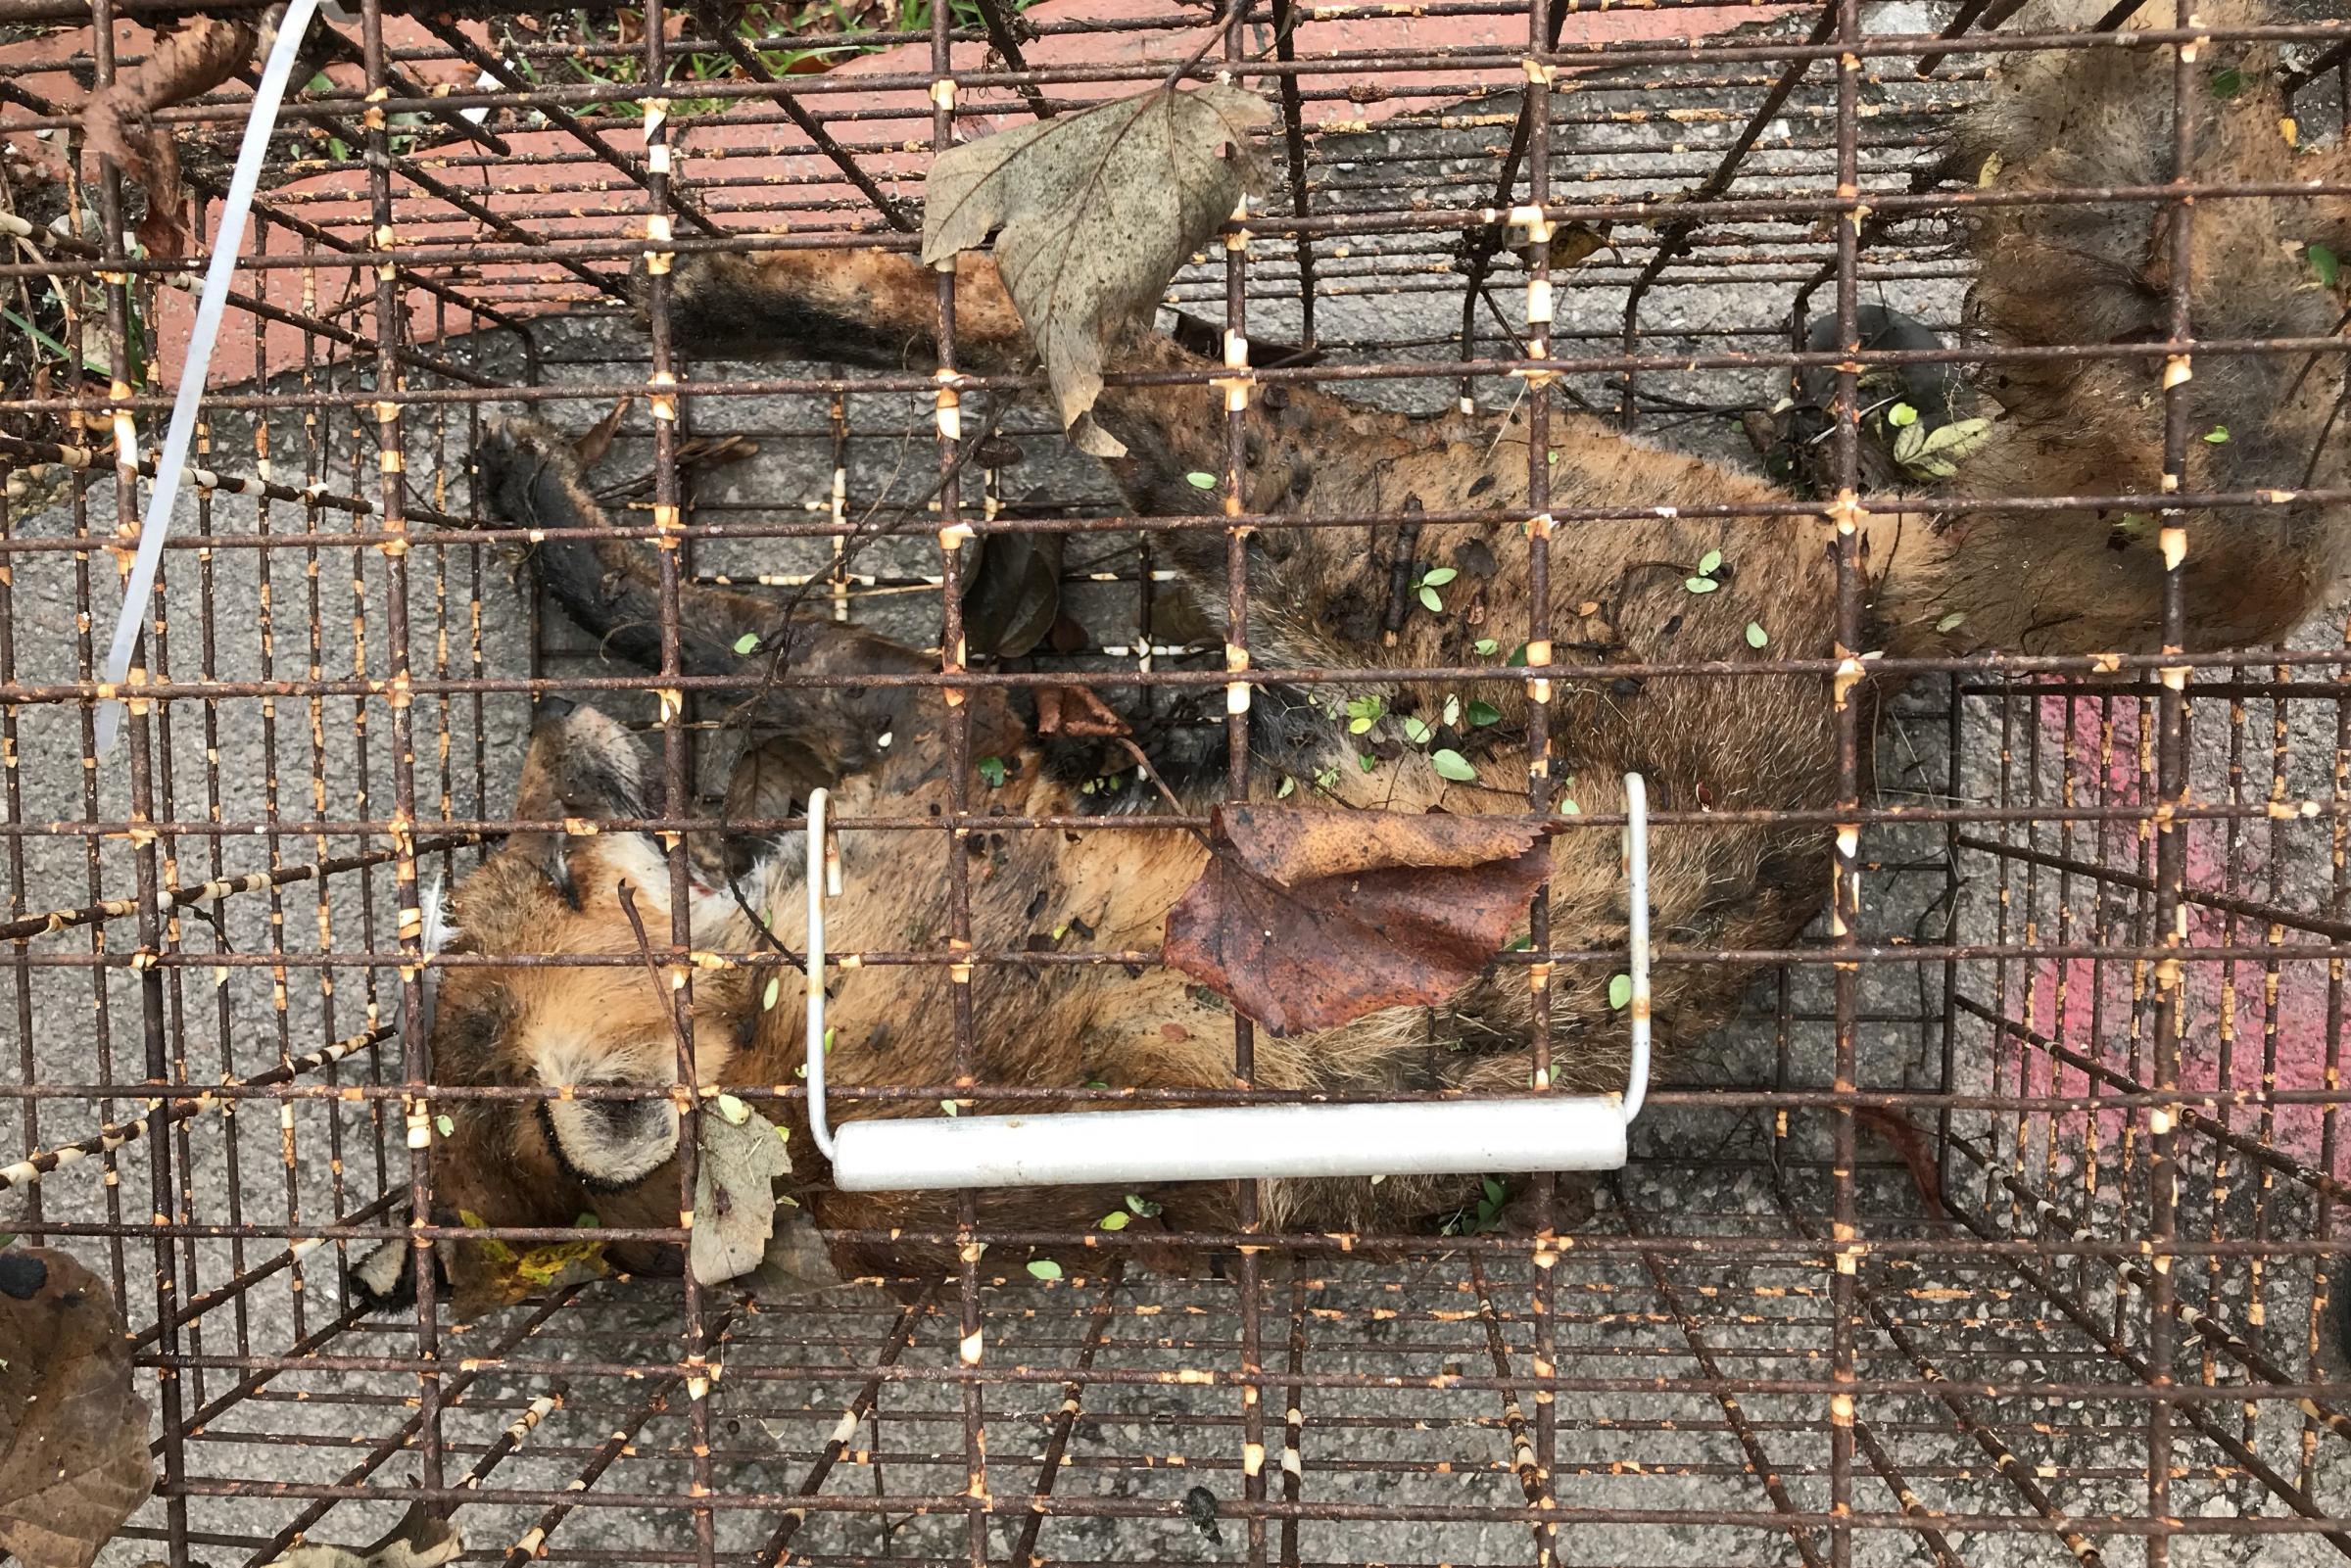 Mystery solved  - This is why a dead fox was found in a cage in Stanmer Park